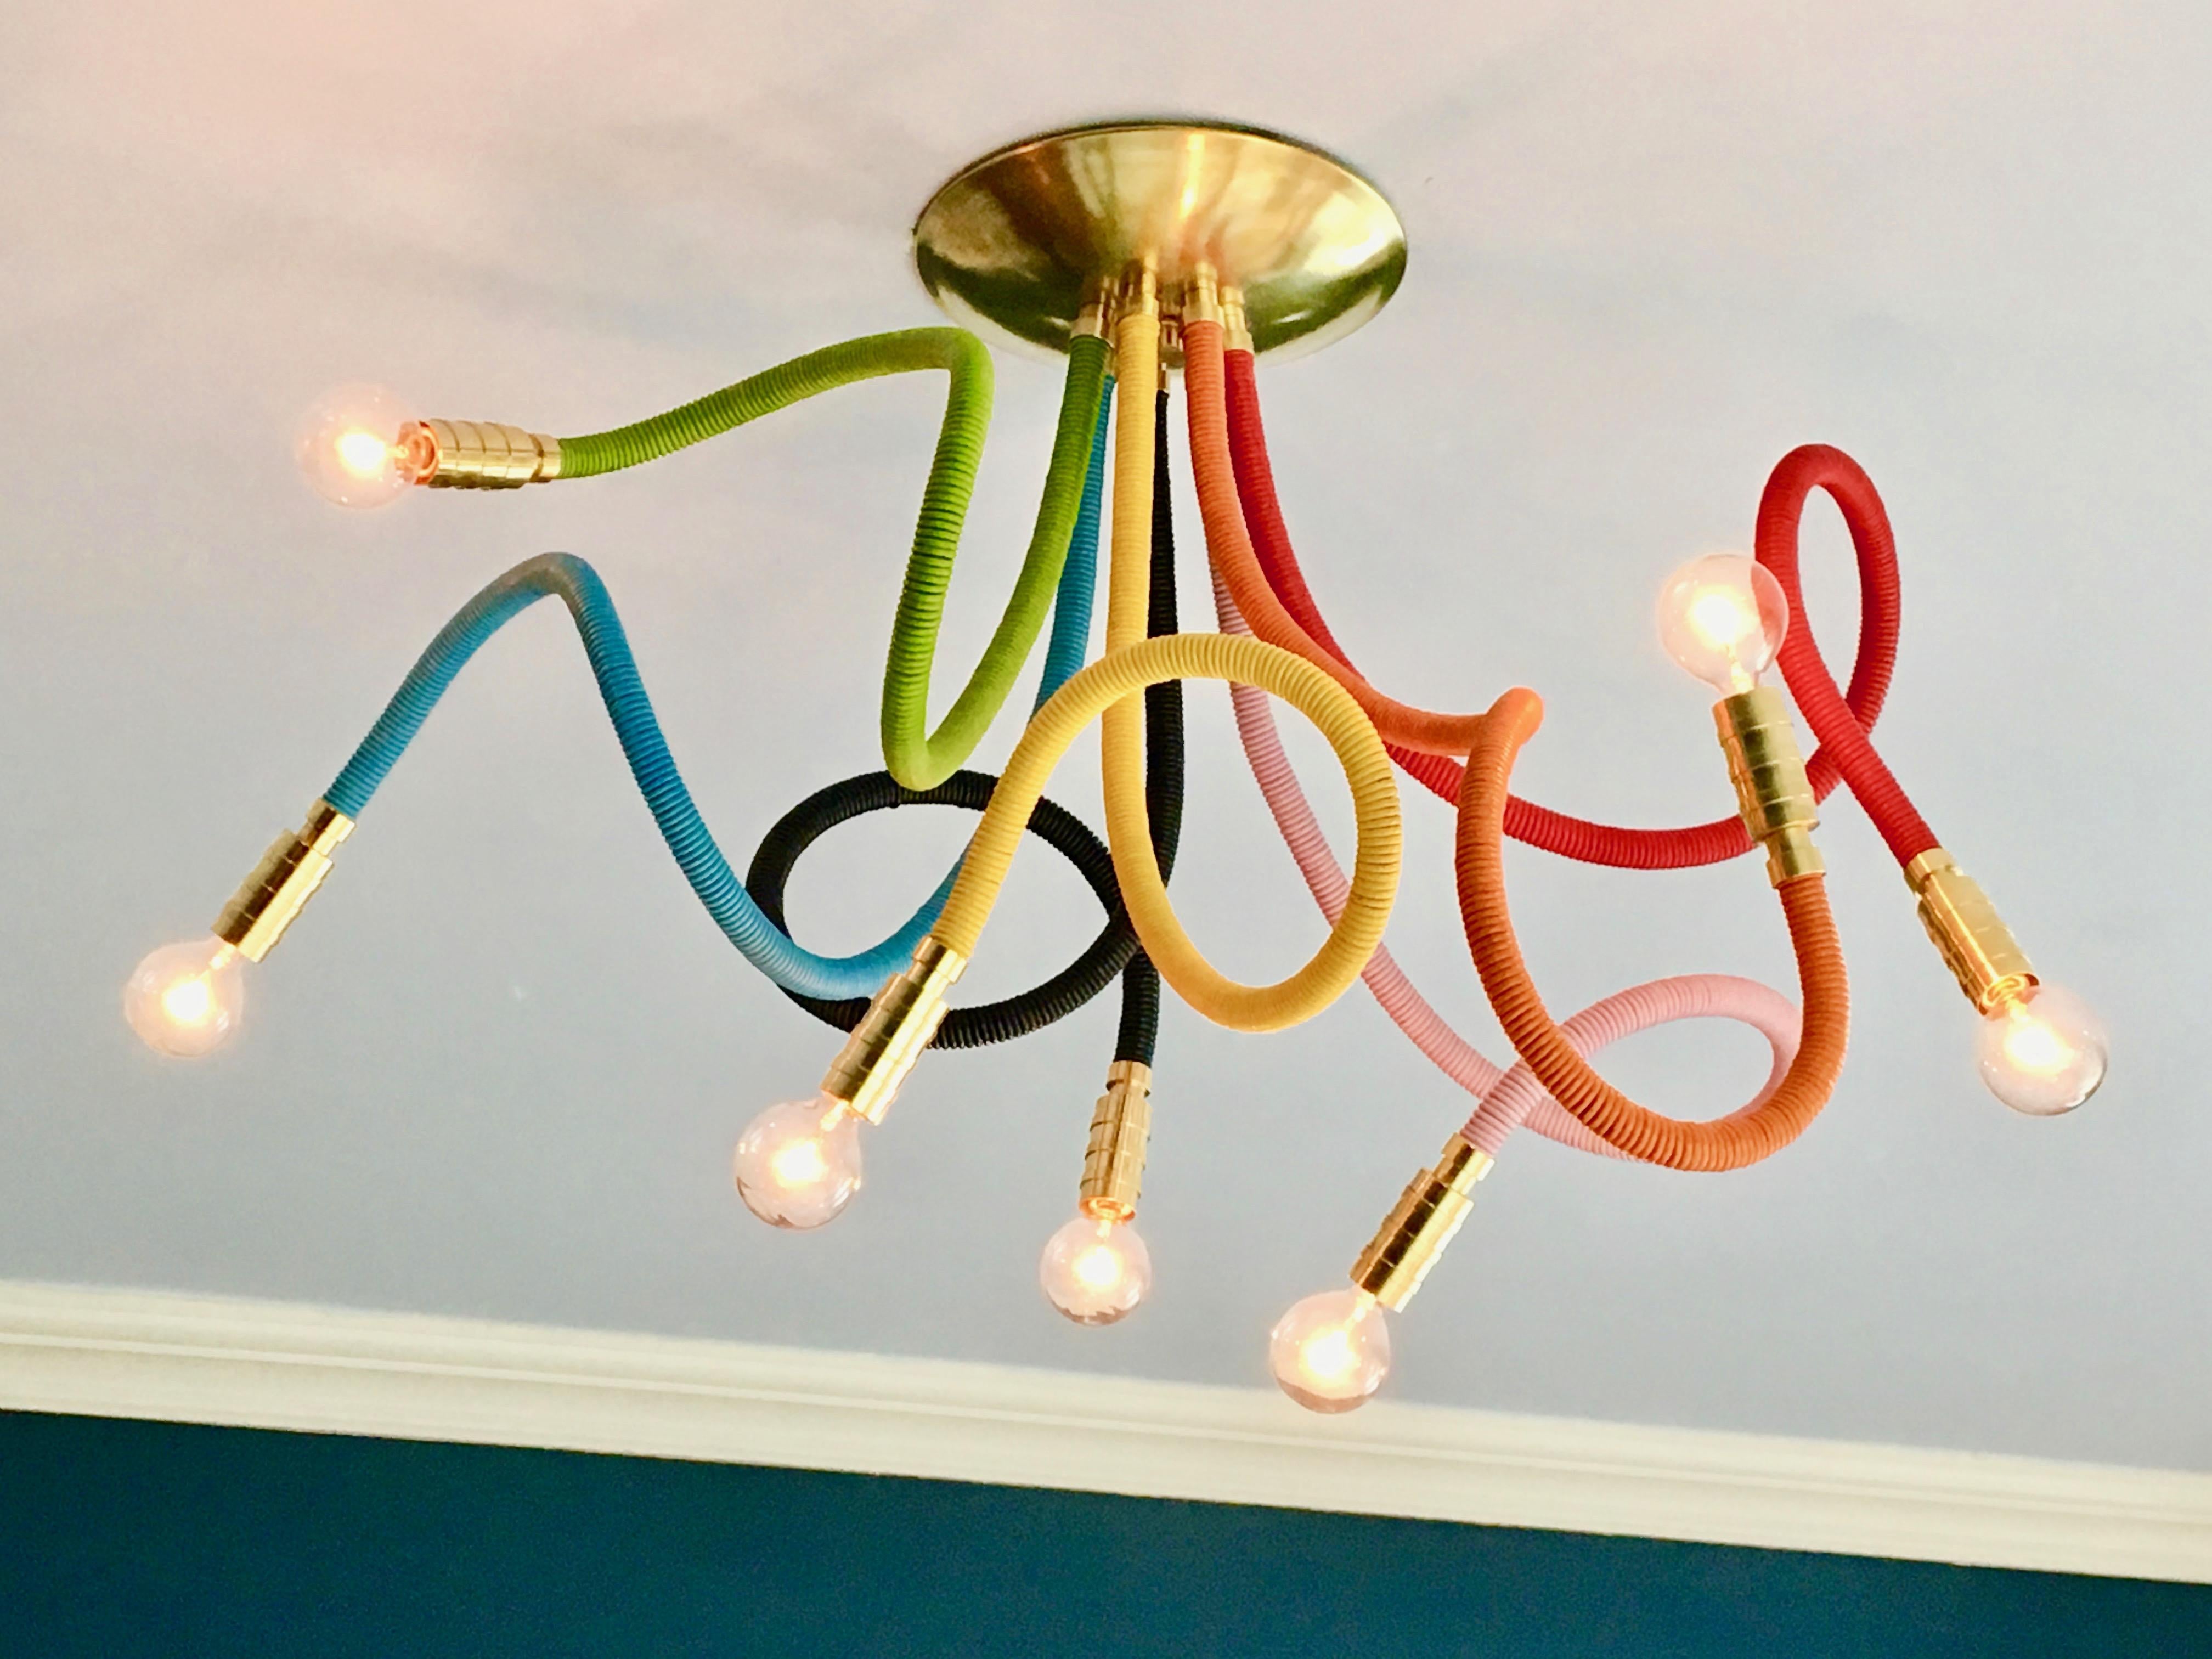 Our Meander Chandelier in glorious ROYGBIV colors. Seven flexible leather wrapped arms allows for playful poses and creative customization. 
As shown or choose from 25 leather colors, standard metal finishes and other custom options.